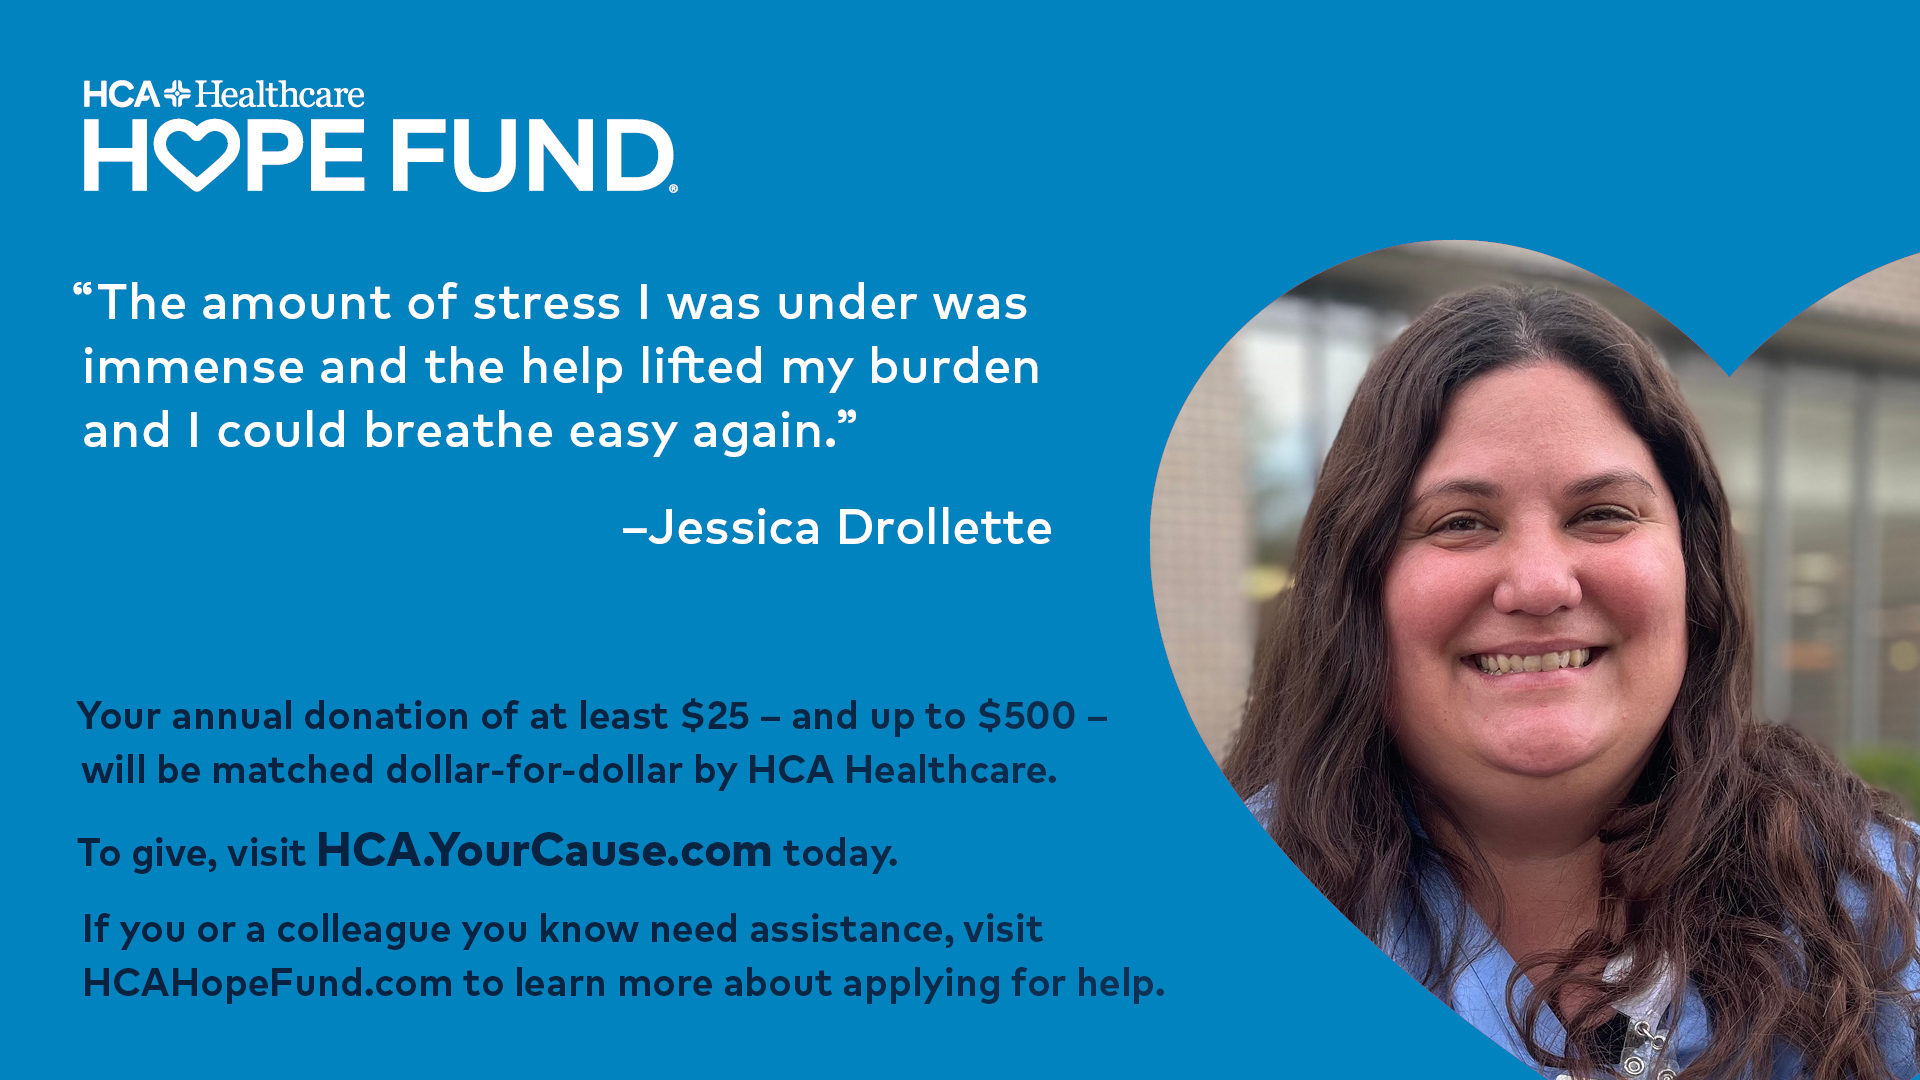 "The amount of stress I was under was immense and the help lifted my burden and I could breathe easy again." - Jessica Drollette, Your annual donation of at least $25 and up to $500 will be matched dollar-for-dollar by HCA healthcare, To give, visit HCA>YourCause.com today, if you or a collogue you know need assistance, visit HCAHopeFund.com to learn more about applying for help.